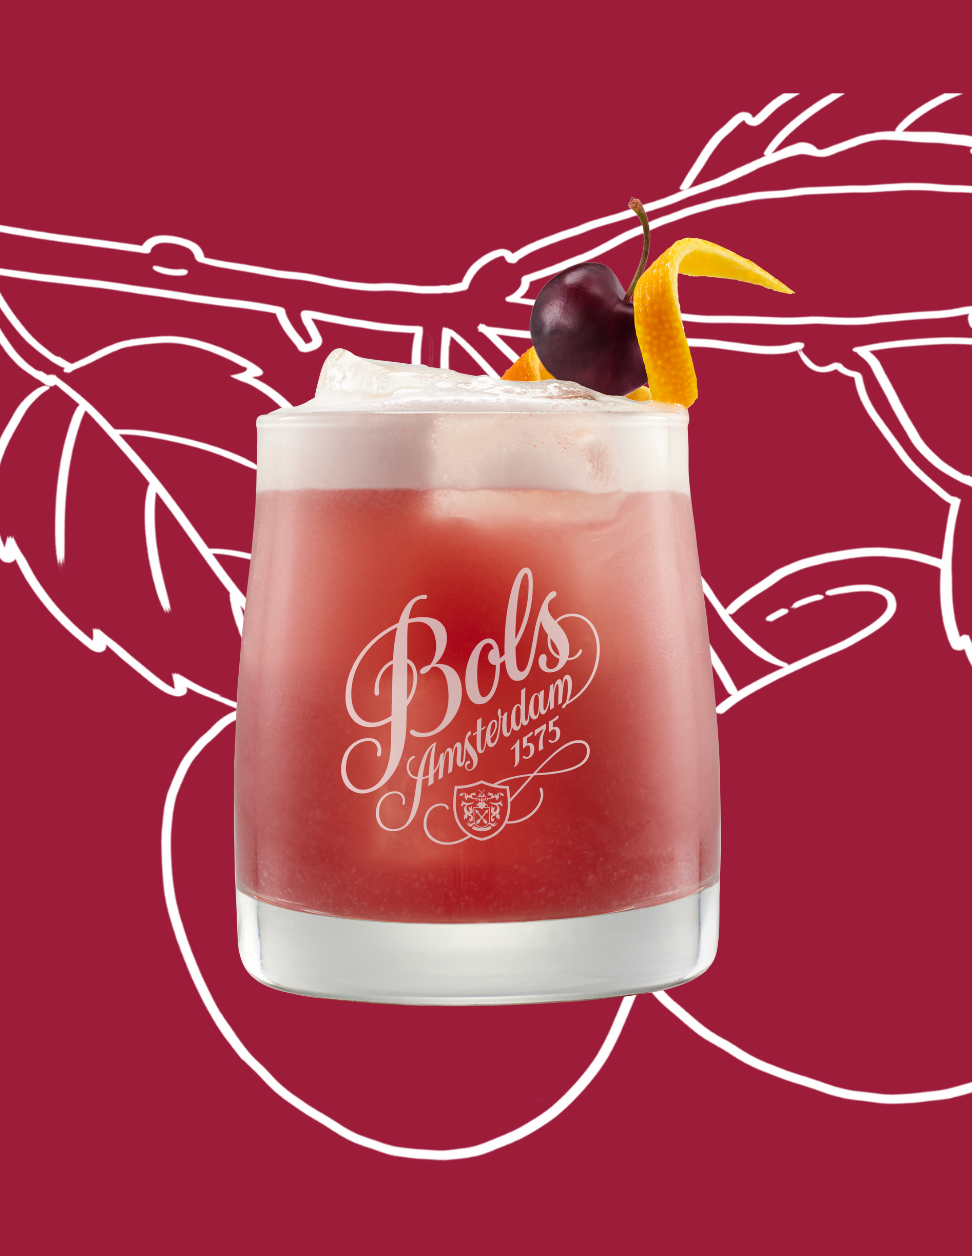 Cherry Sour Cocktail Recipe with Bols Cherry Brandy Products